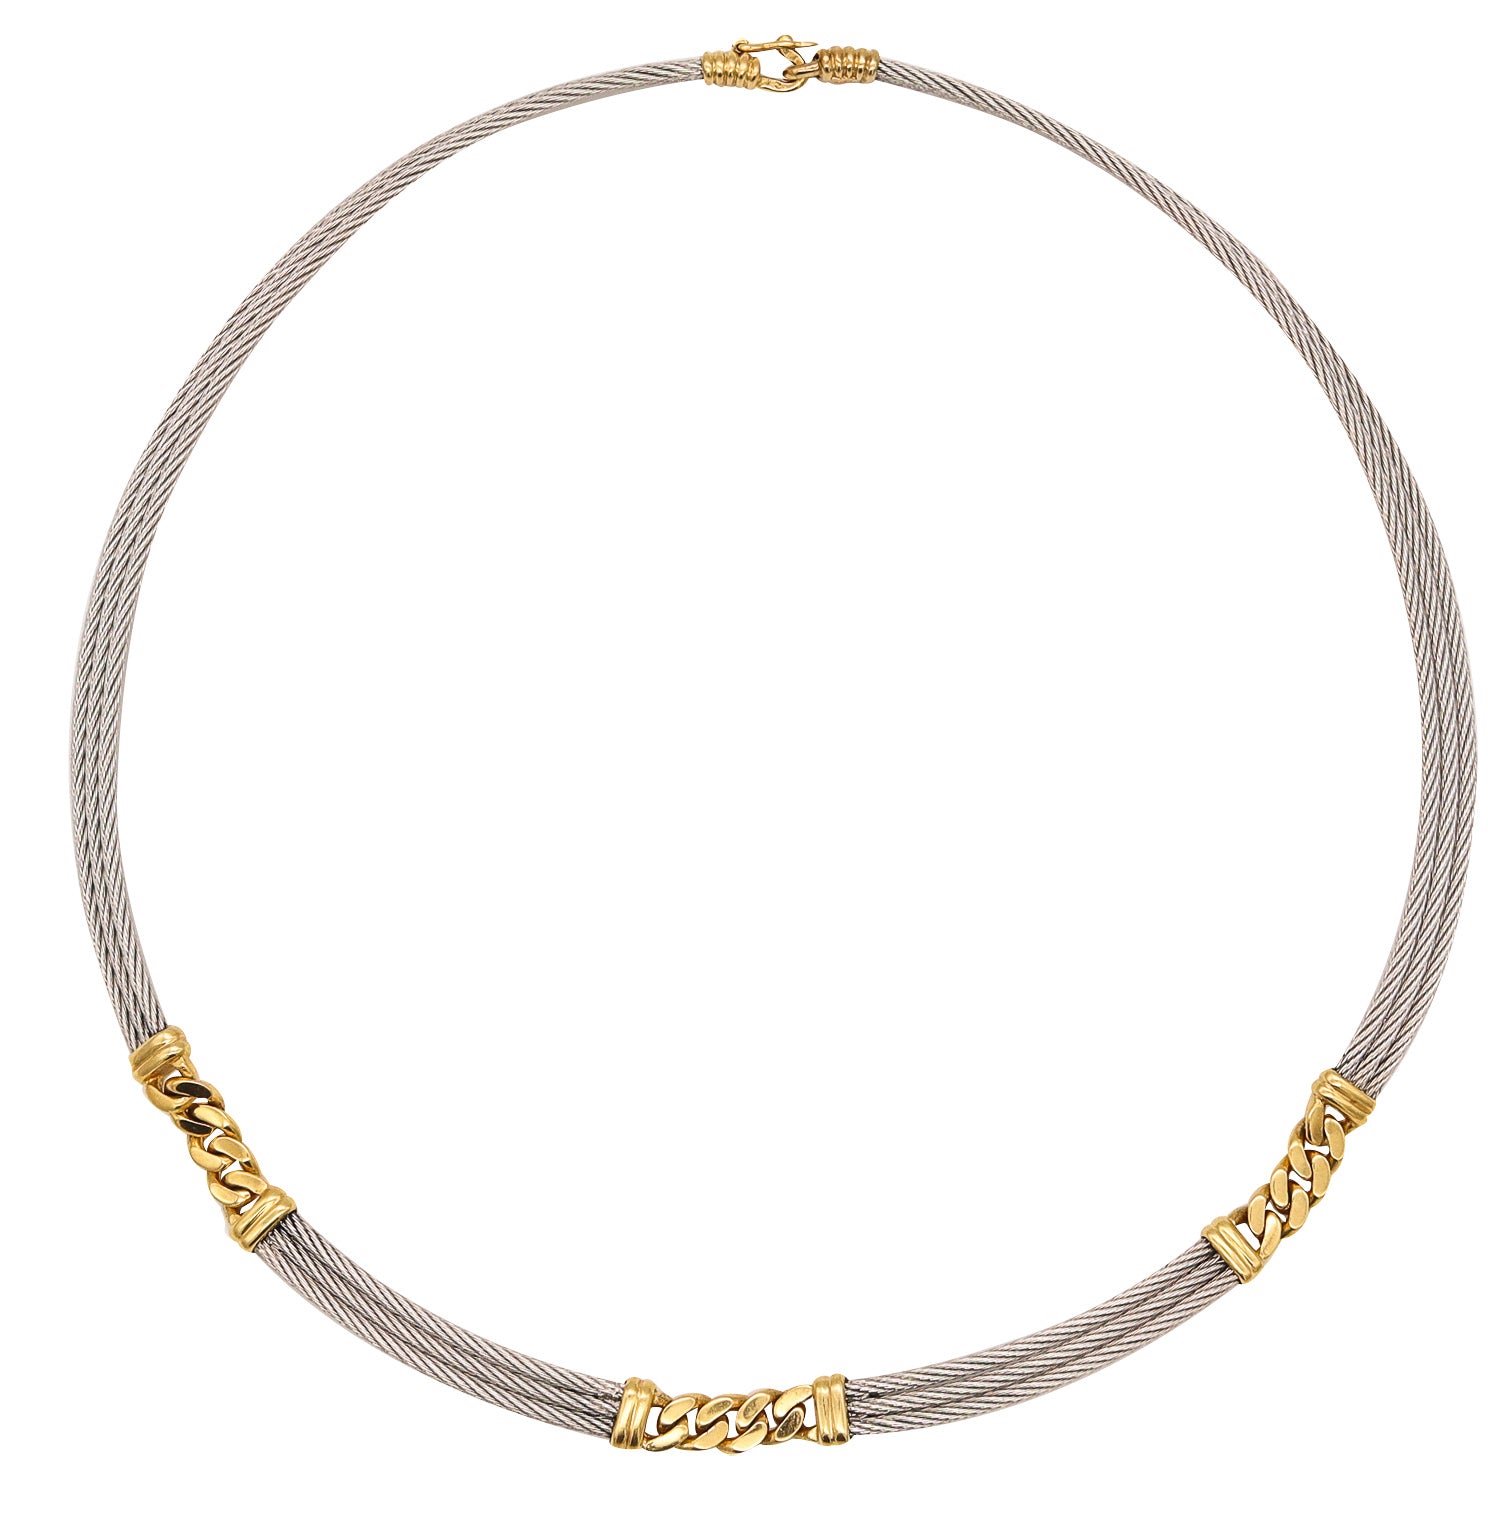 FRED PARIS 1970 RARE CHOKER NECKLACE IN 18 KT GOLD WITH HERCULES KNOT –  Treasure Fine Jewelry